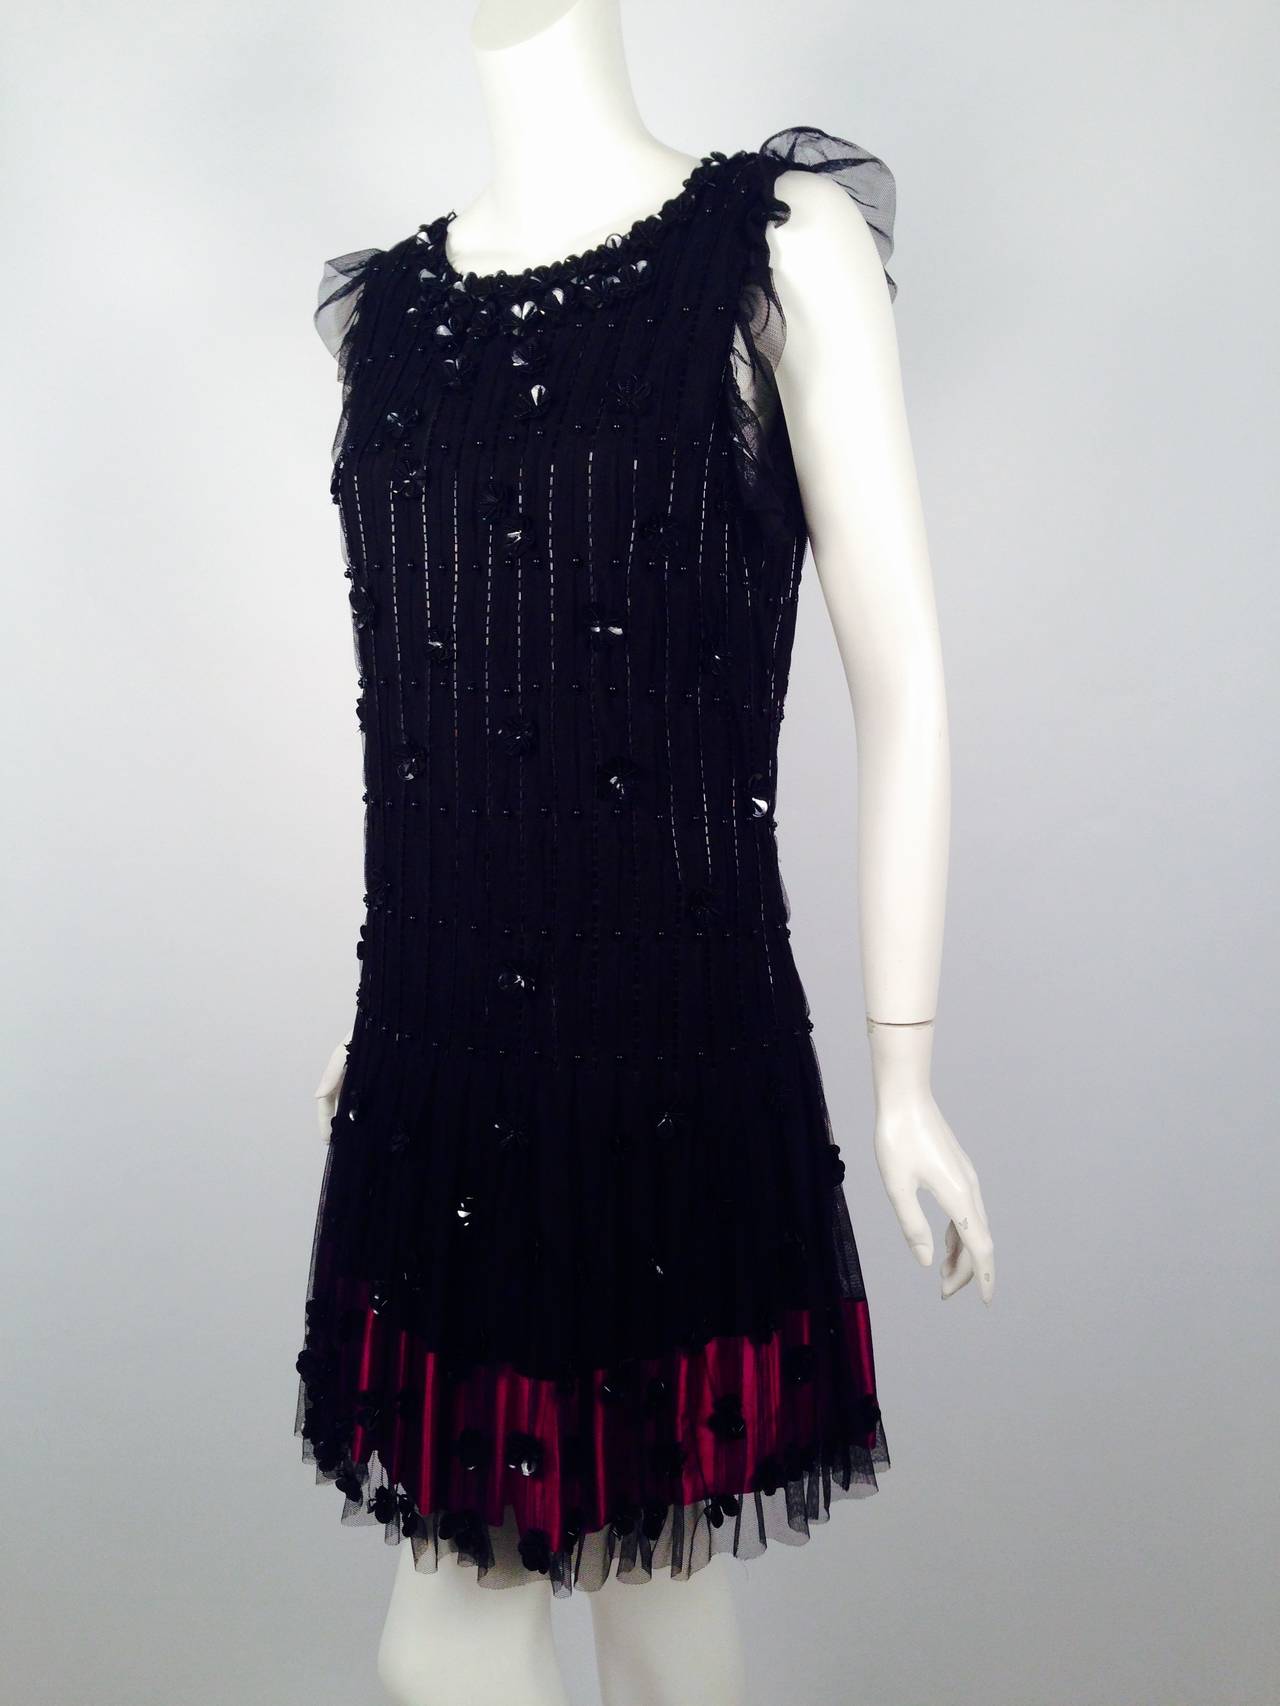 Dinner and dancing, anyone?  Brand New RED Valentino dress is a perfect choice for a night that will not soon be forgotten!  Various beads and floral paillettes shower the net overlay.  Slightly capped sleeves are created from flirtatious netting. 